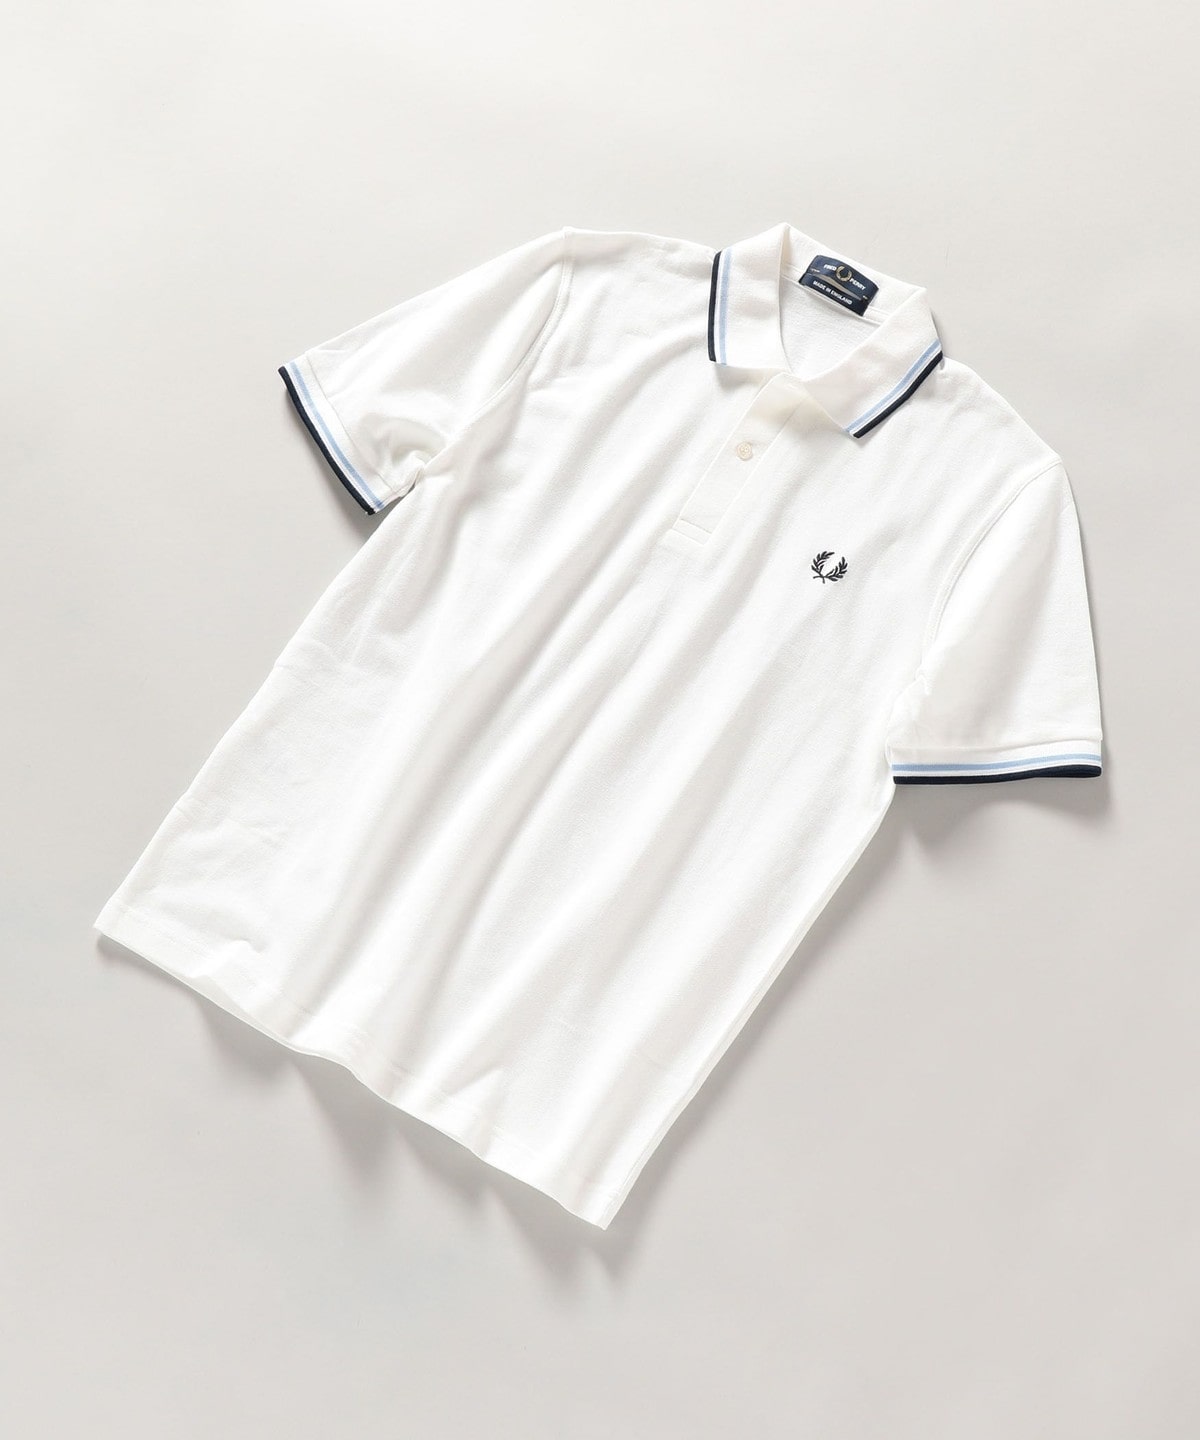 FRED PERRY:【M12】ENGLAND ポロシャツ: Tシャツ/カットソー SHIPS 